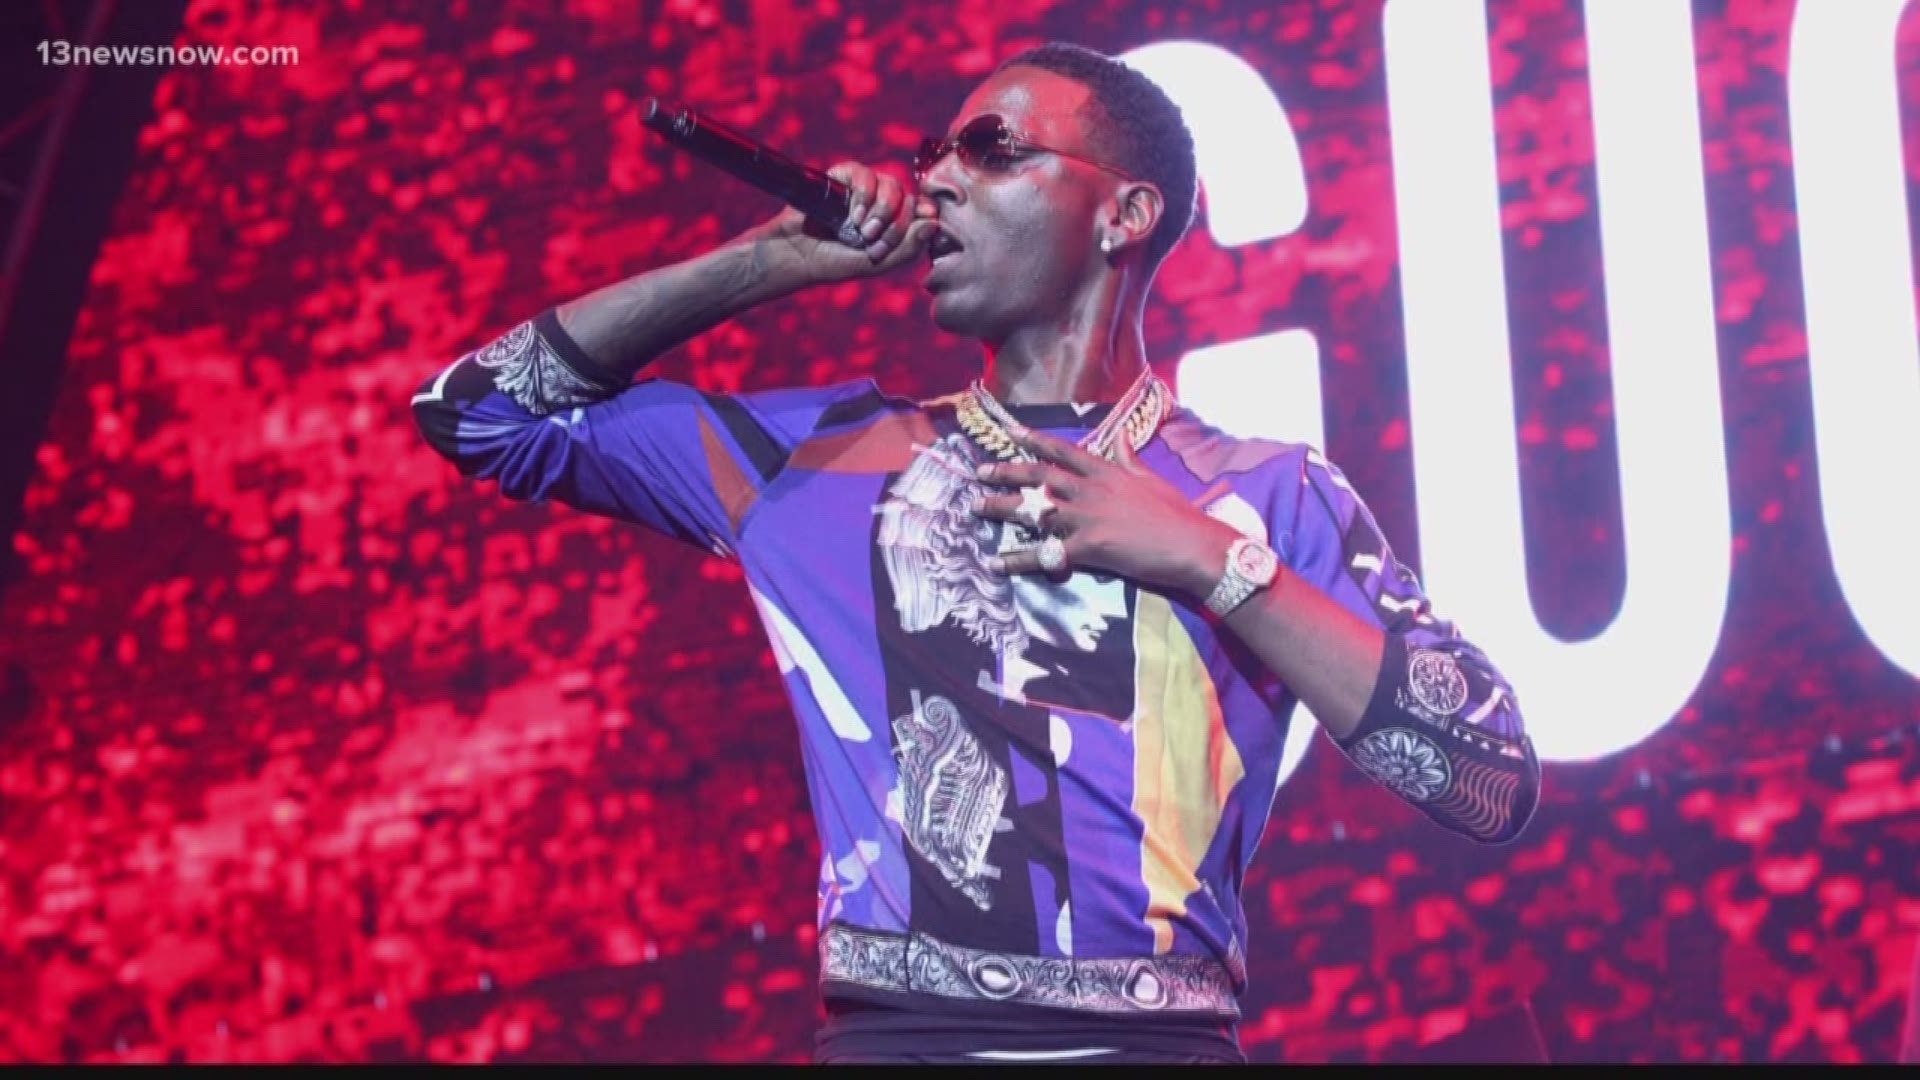 Newport News Police raided rapper Young Dolph's tour bus while he performed at Boathouse Live.